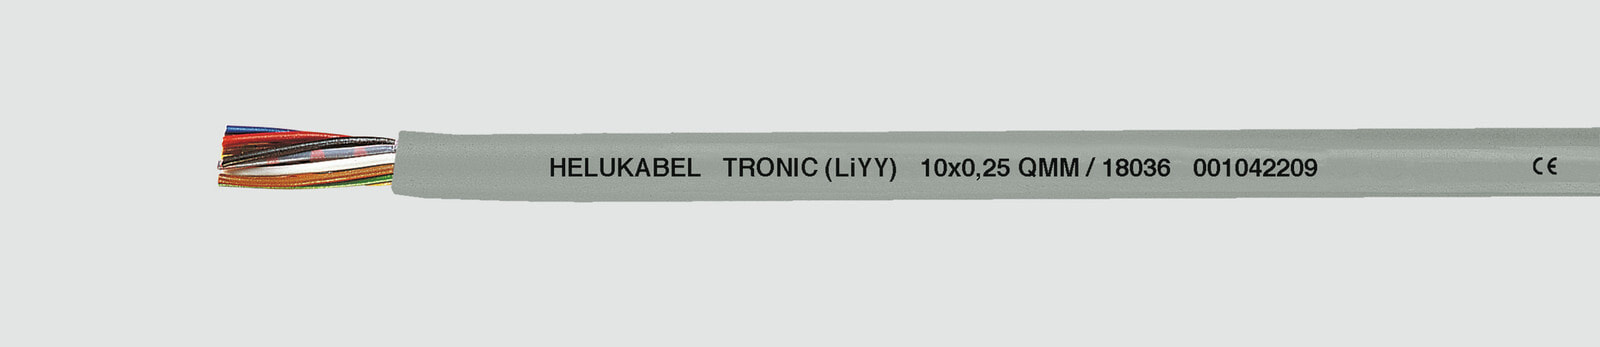 Helukabel TRONIC (LiYY) - Low voltage cable - Grey - Polyvinyl chloride (PVC) - Cooper - 0.25 mm² - 7.2 kg/km